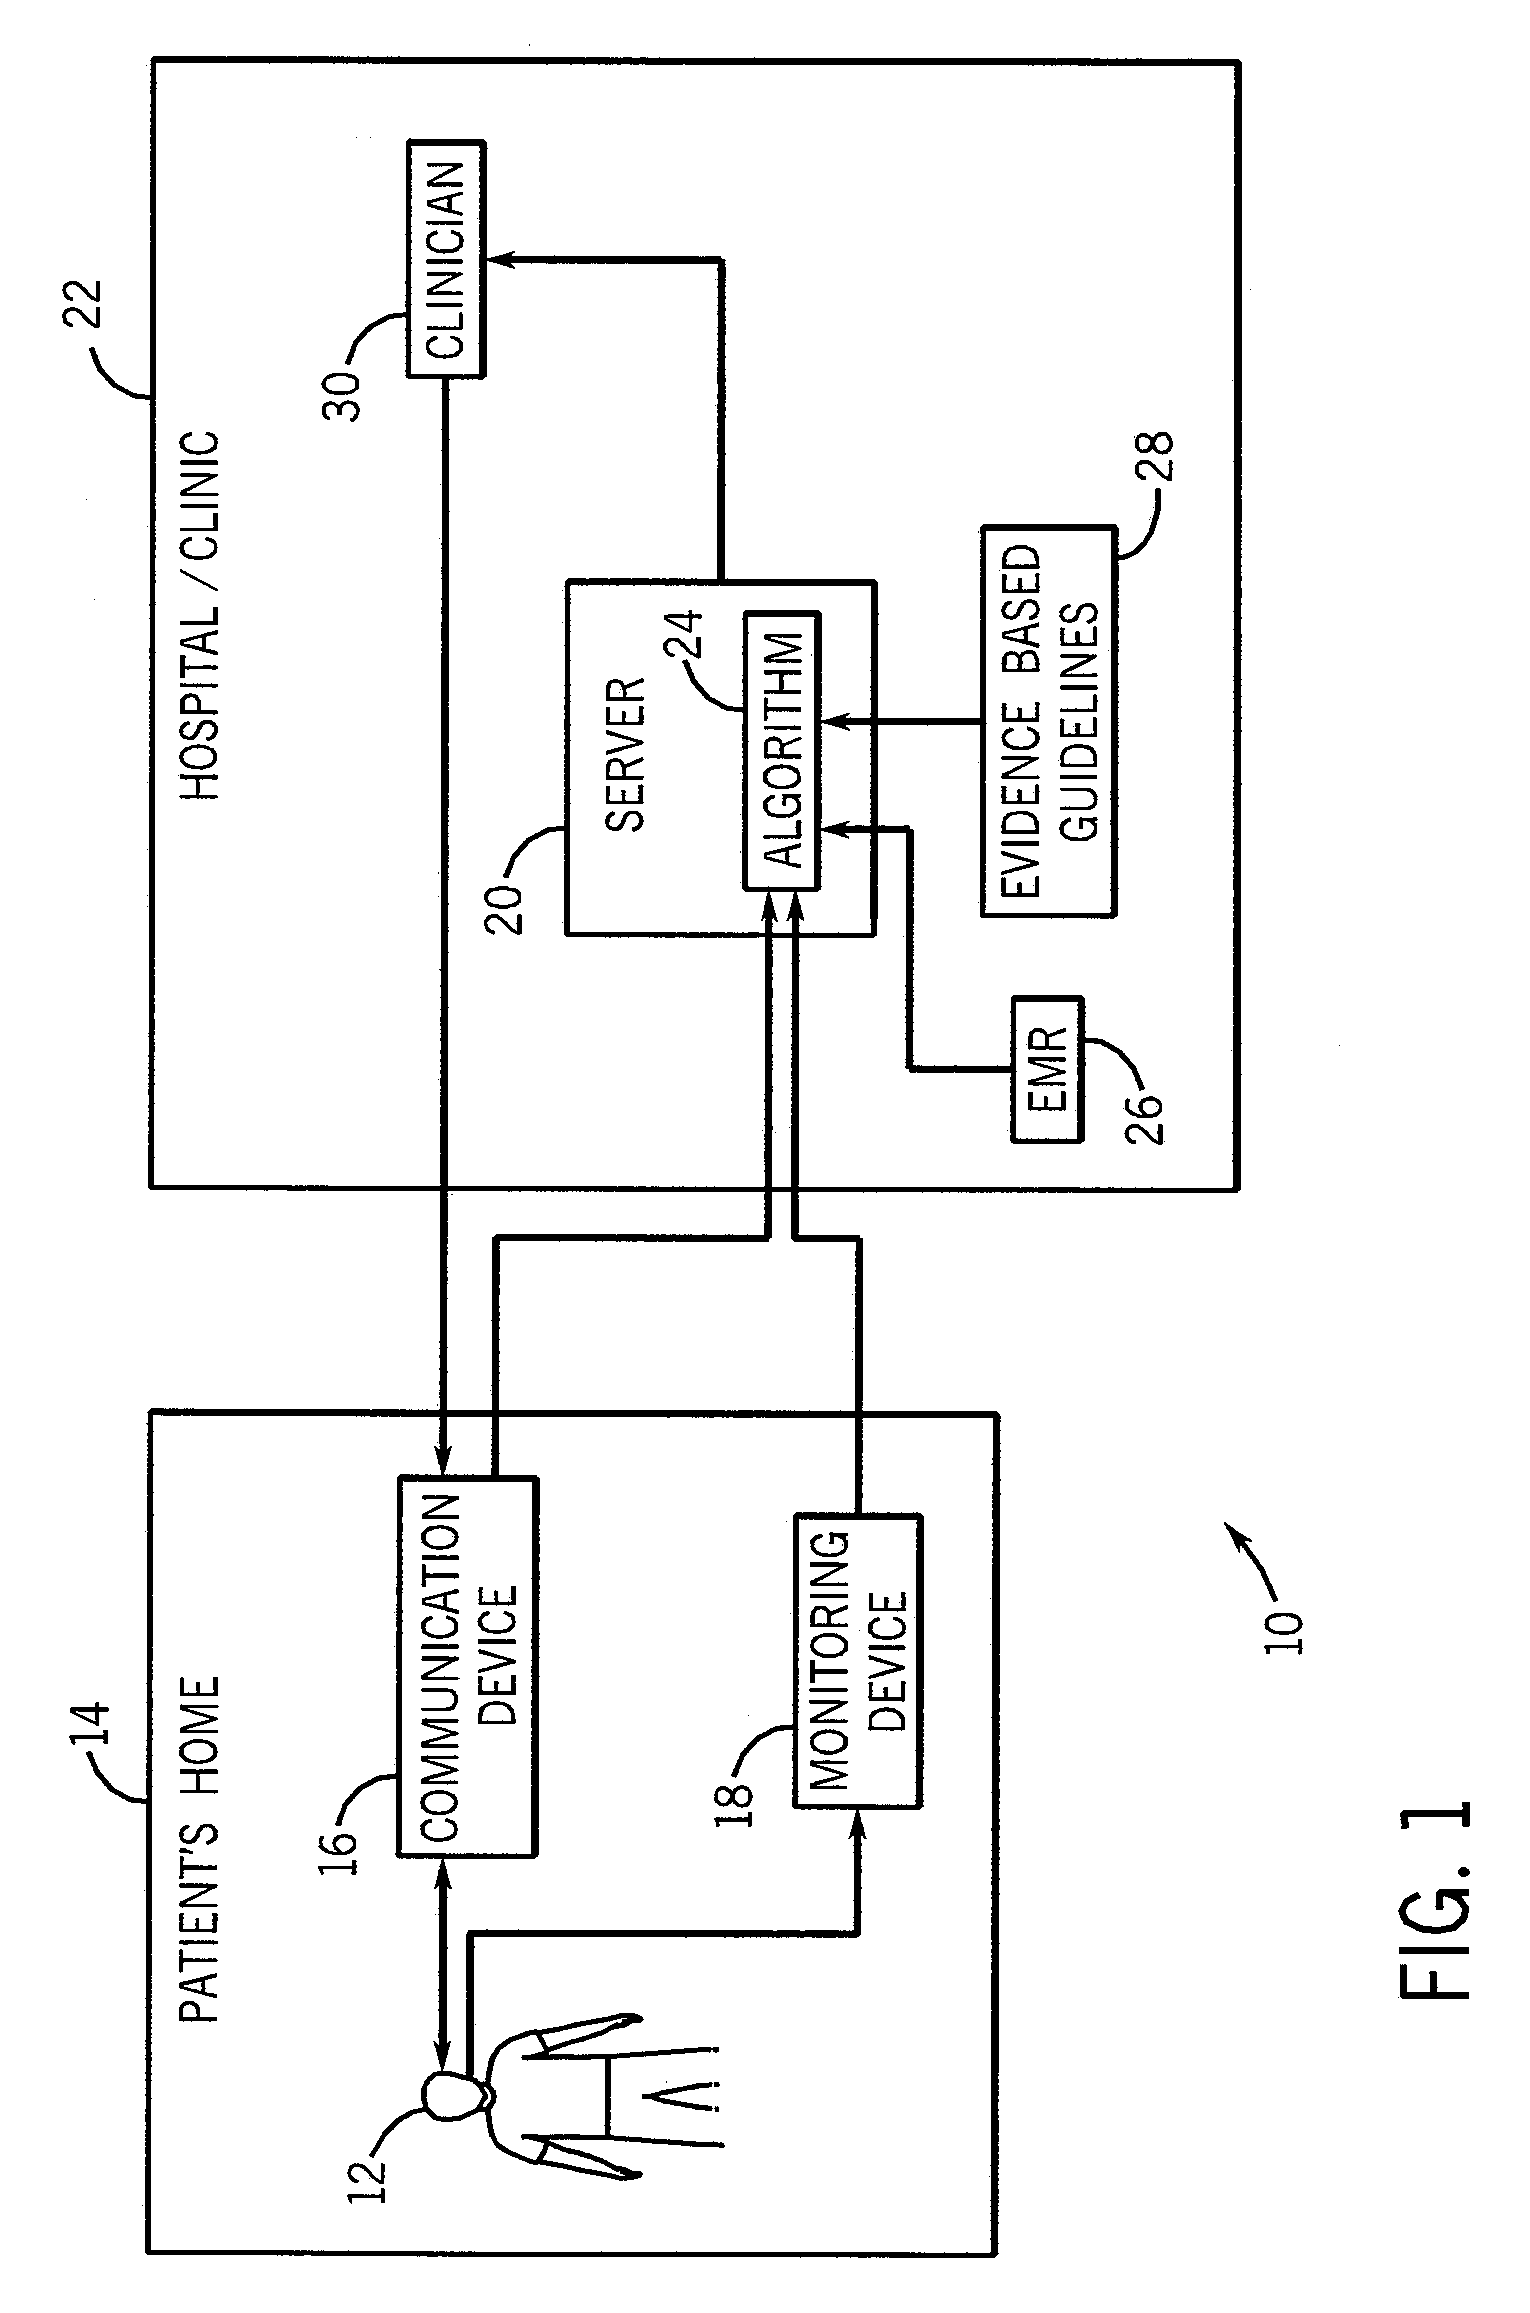 Method and system for remotely administering a diuretic therapy